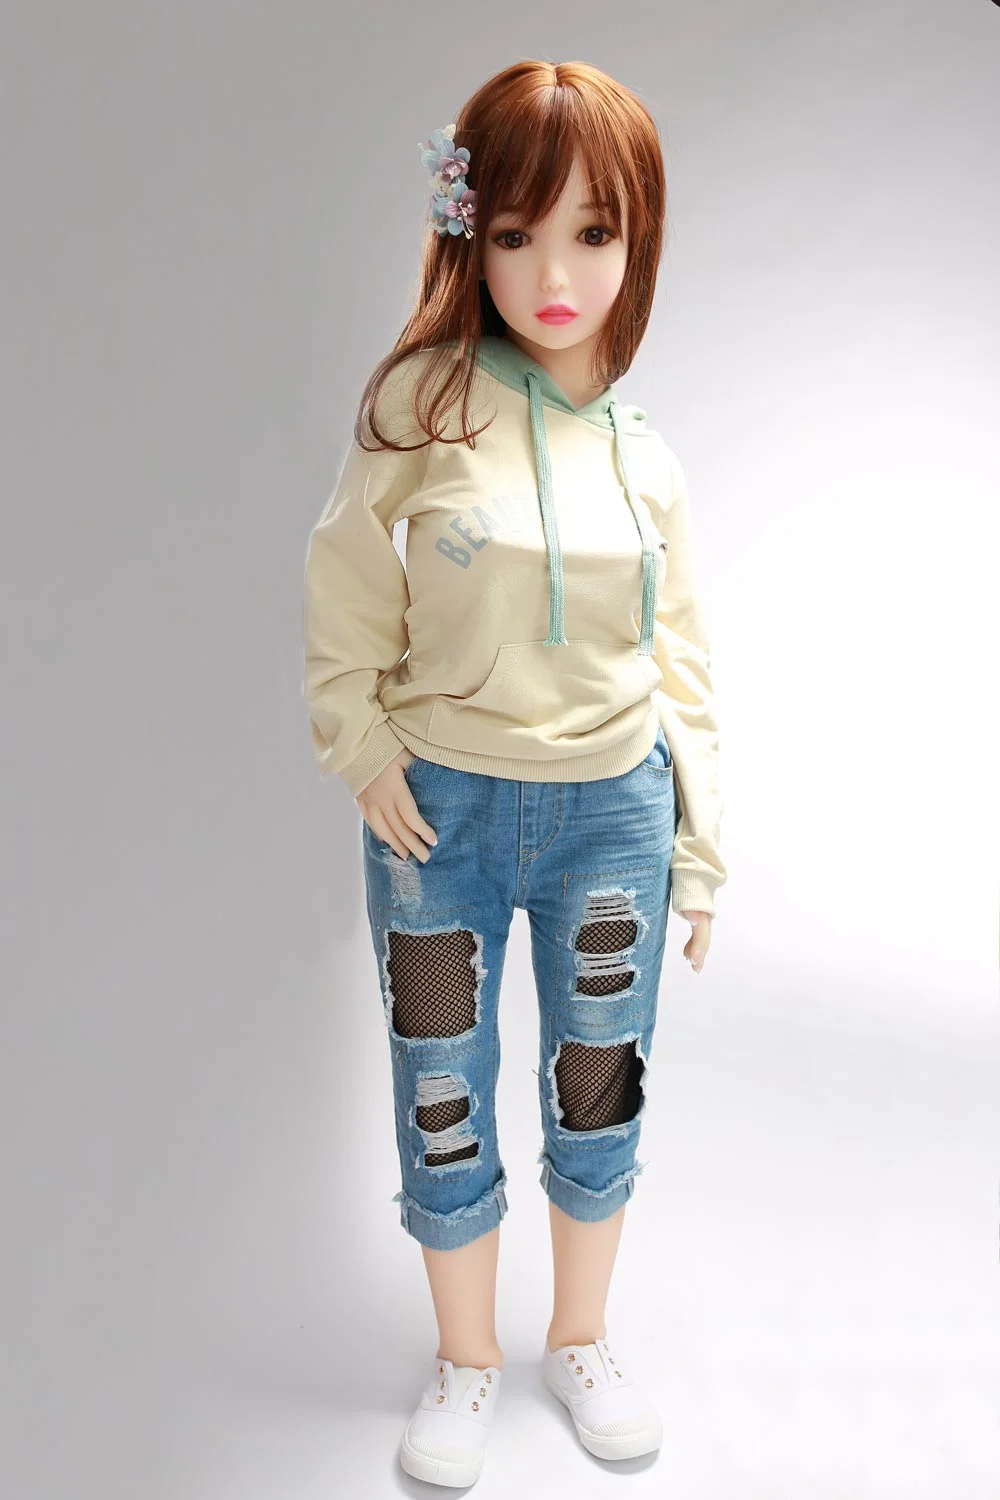 Sex doll with hand in pocket